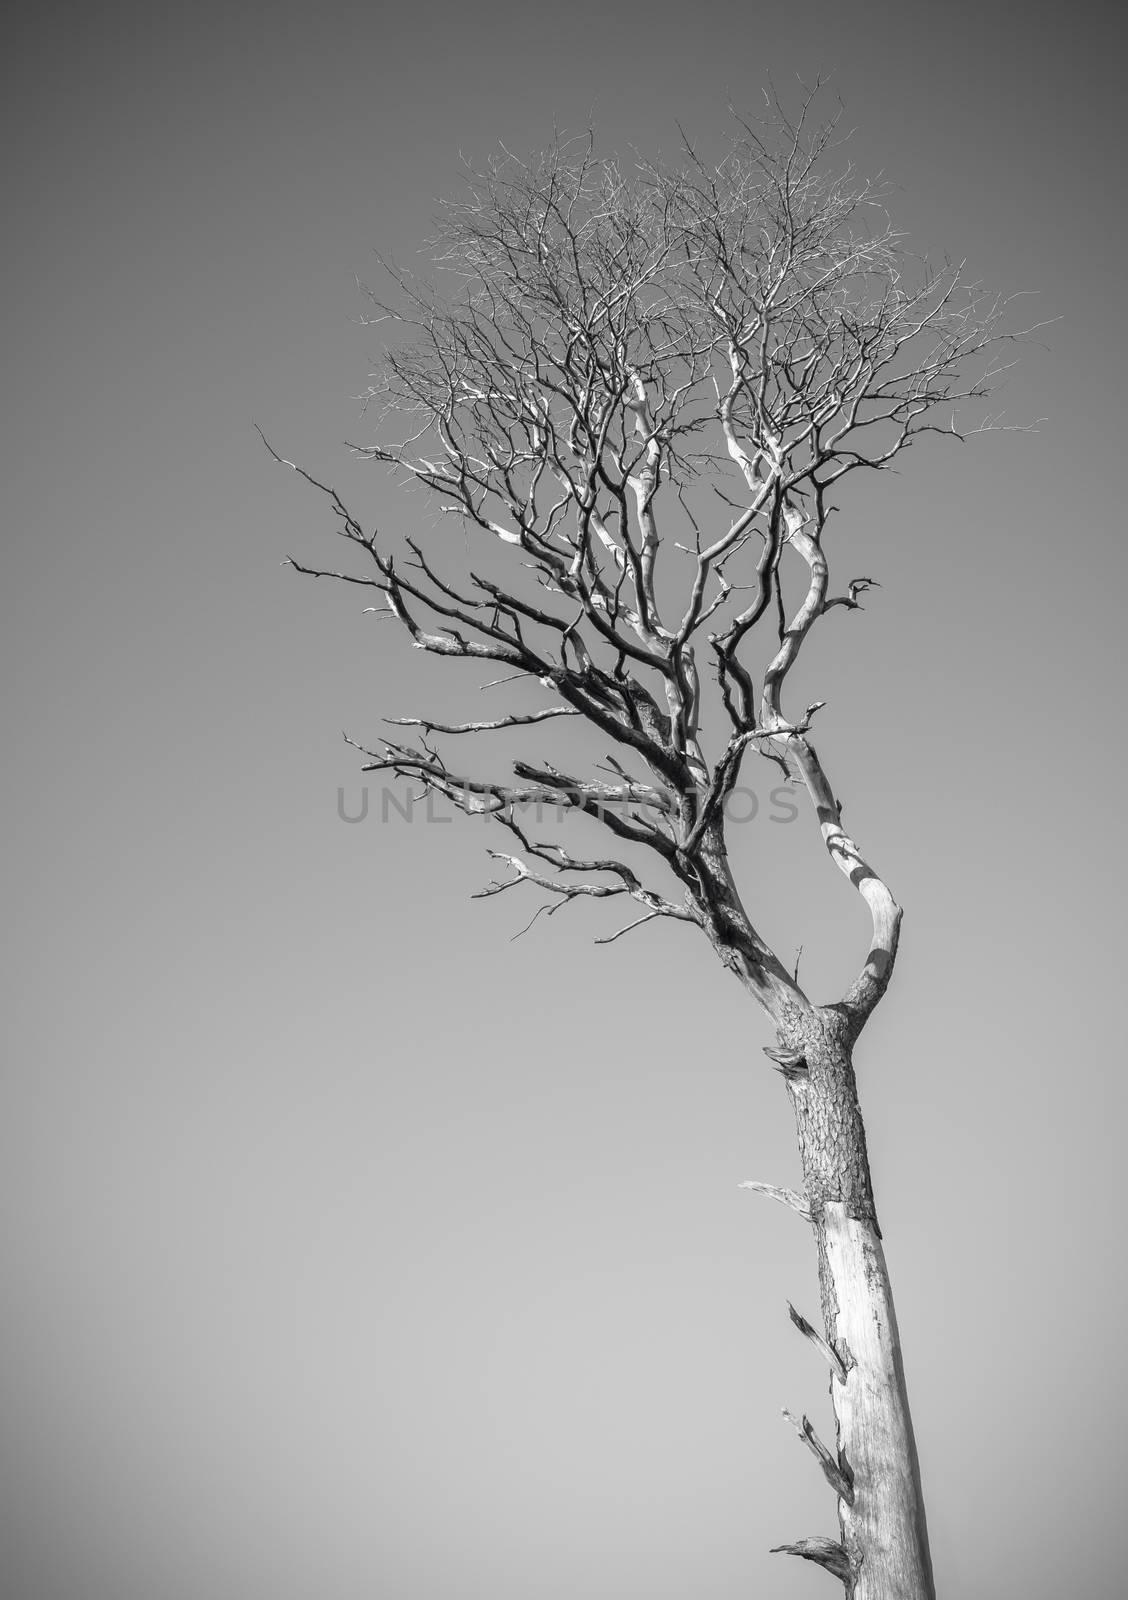 A Dramatic Dead Tree Against A Clear Sky In Black And White With Copy Space